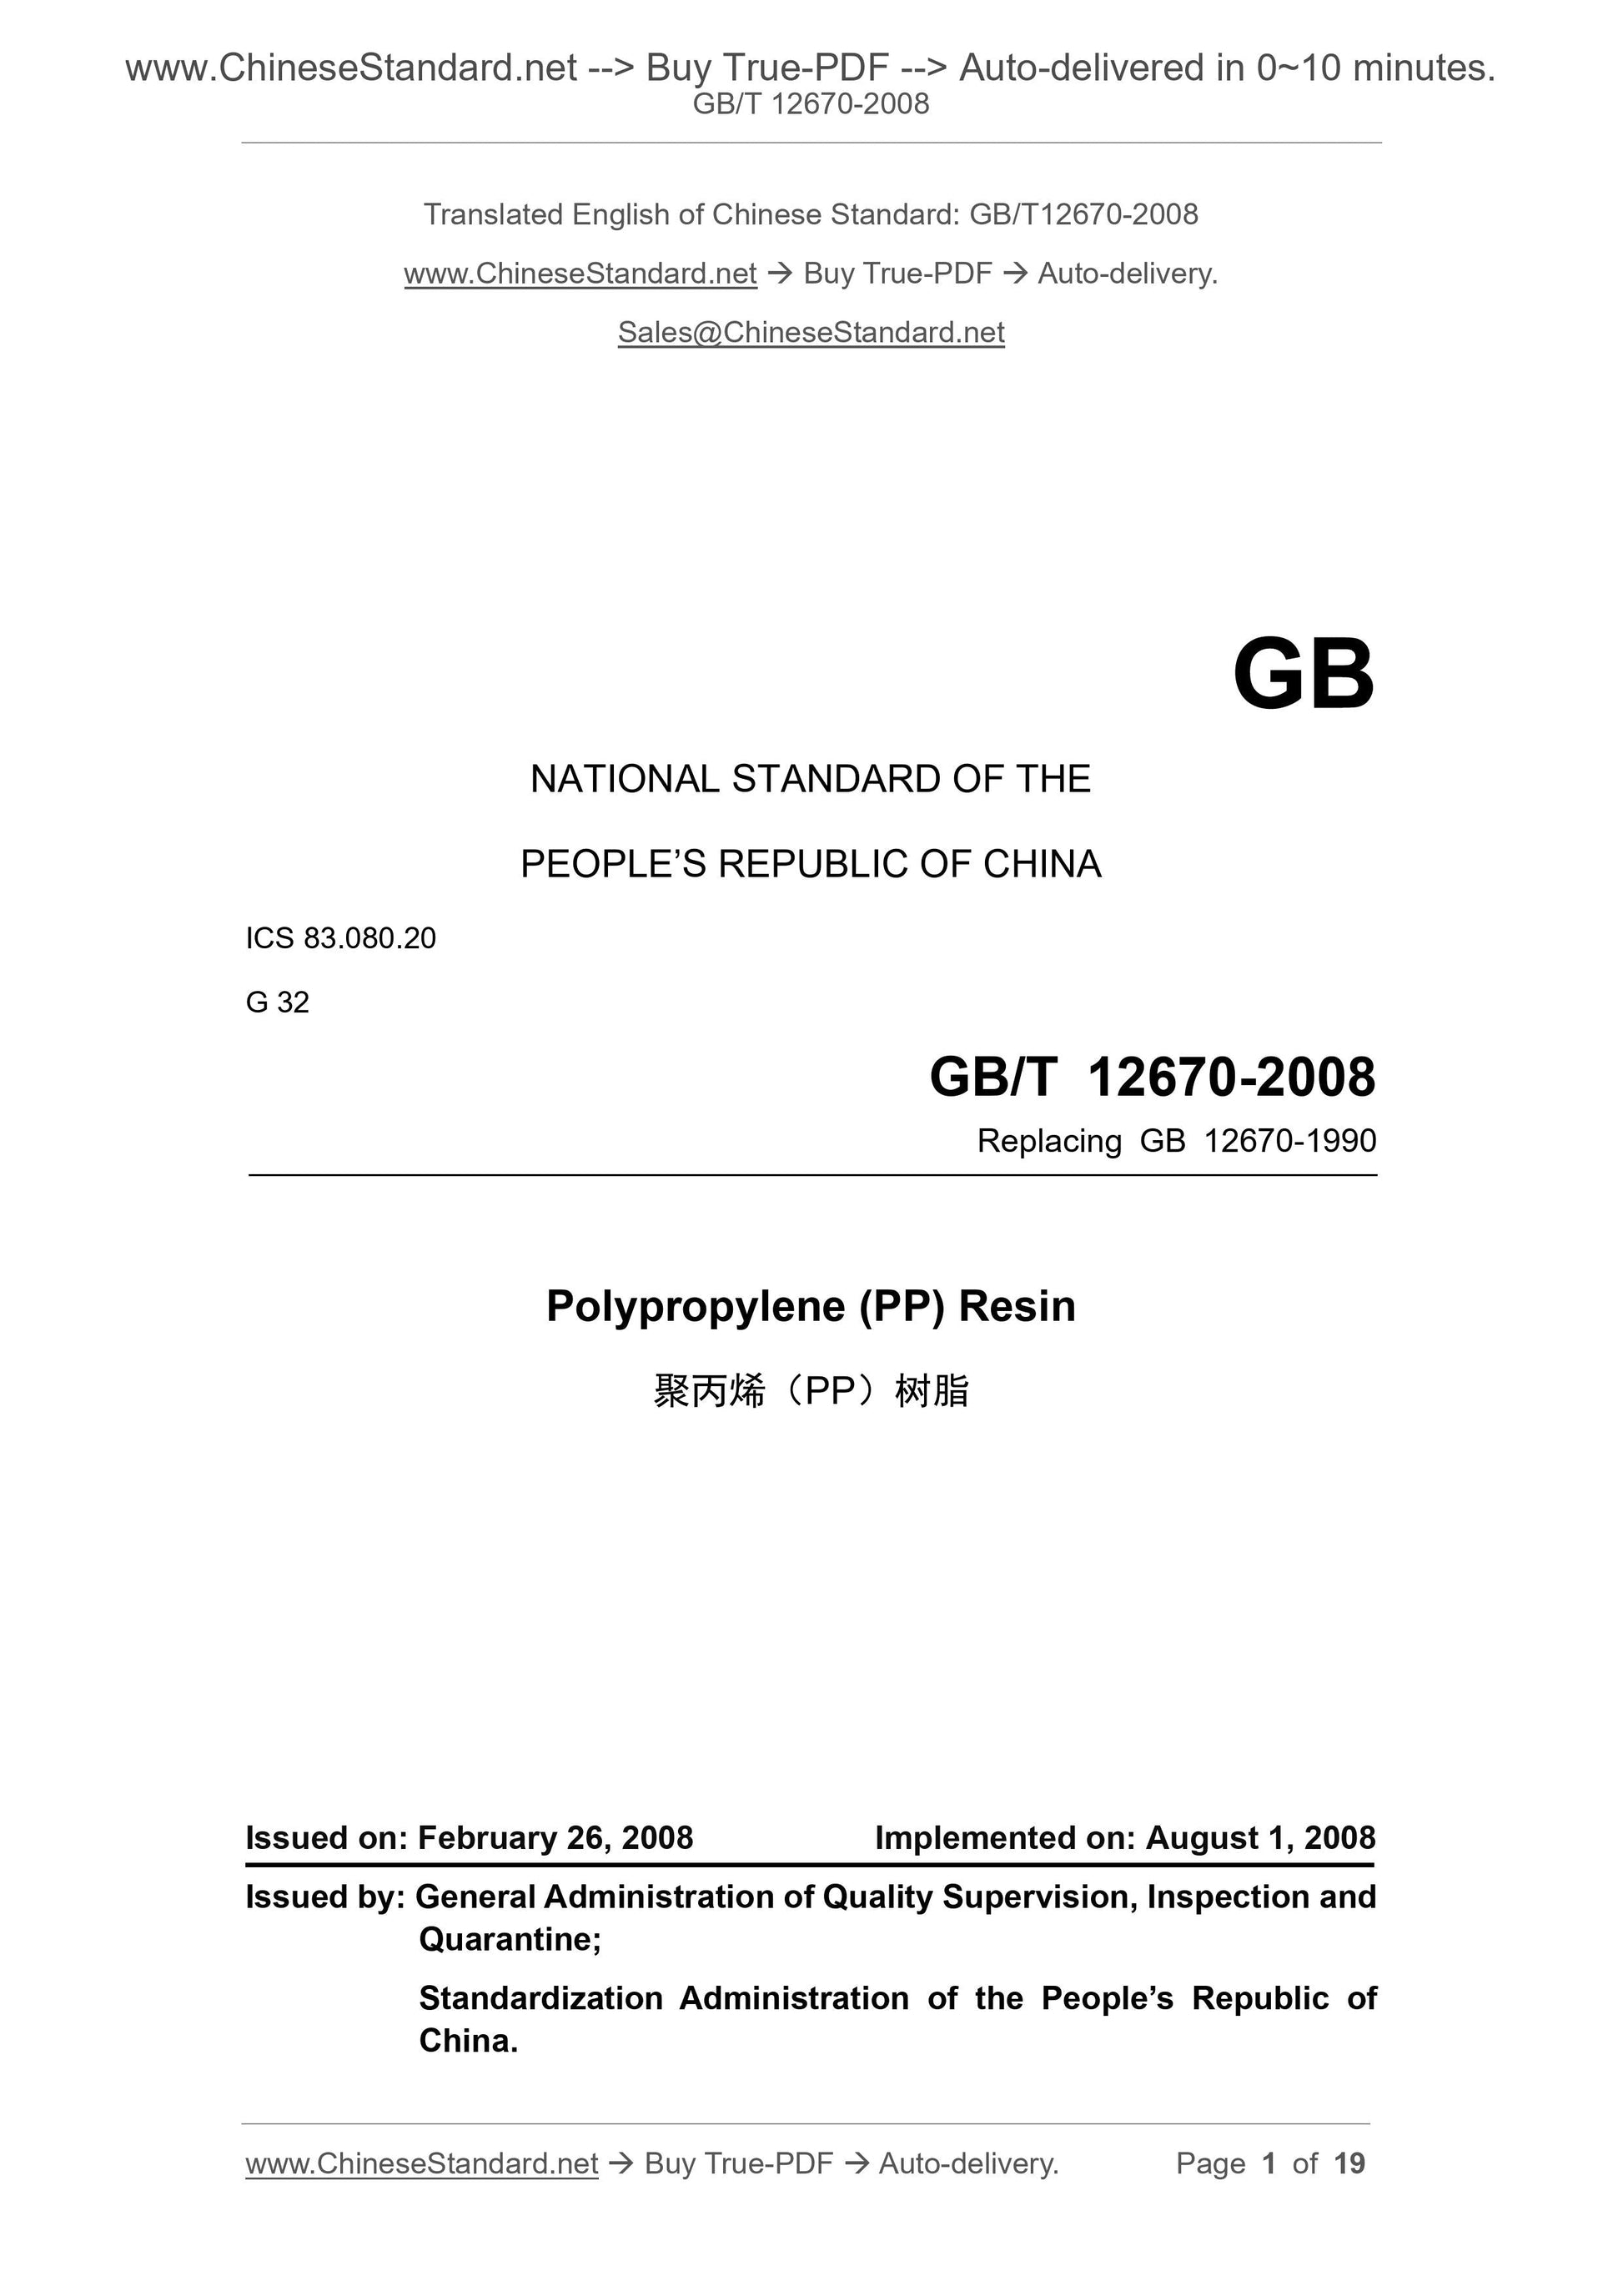 GB/T 12670-2008 Page 1